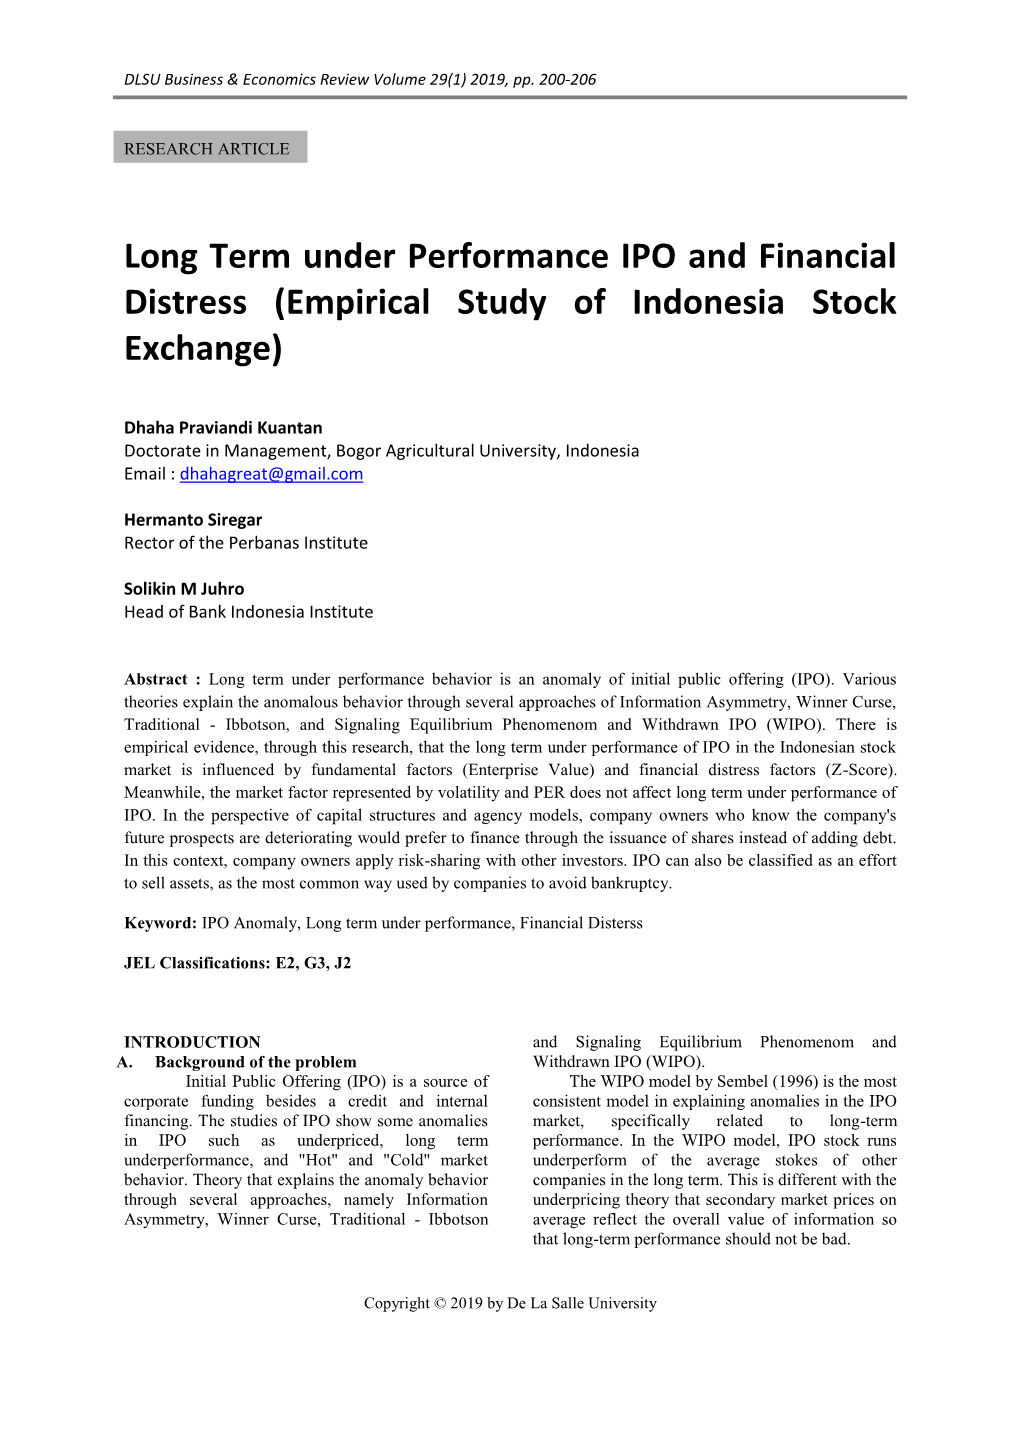 Long Term Under Performance IPO and Financial Distress (Empirical Study of Indonesia Stock Exchange)